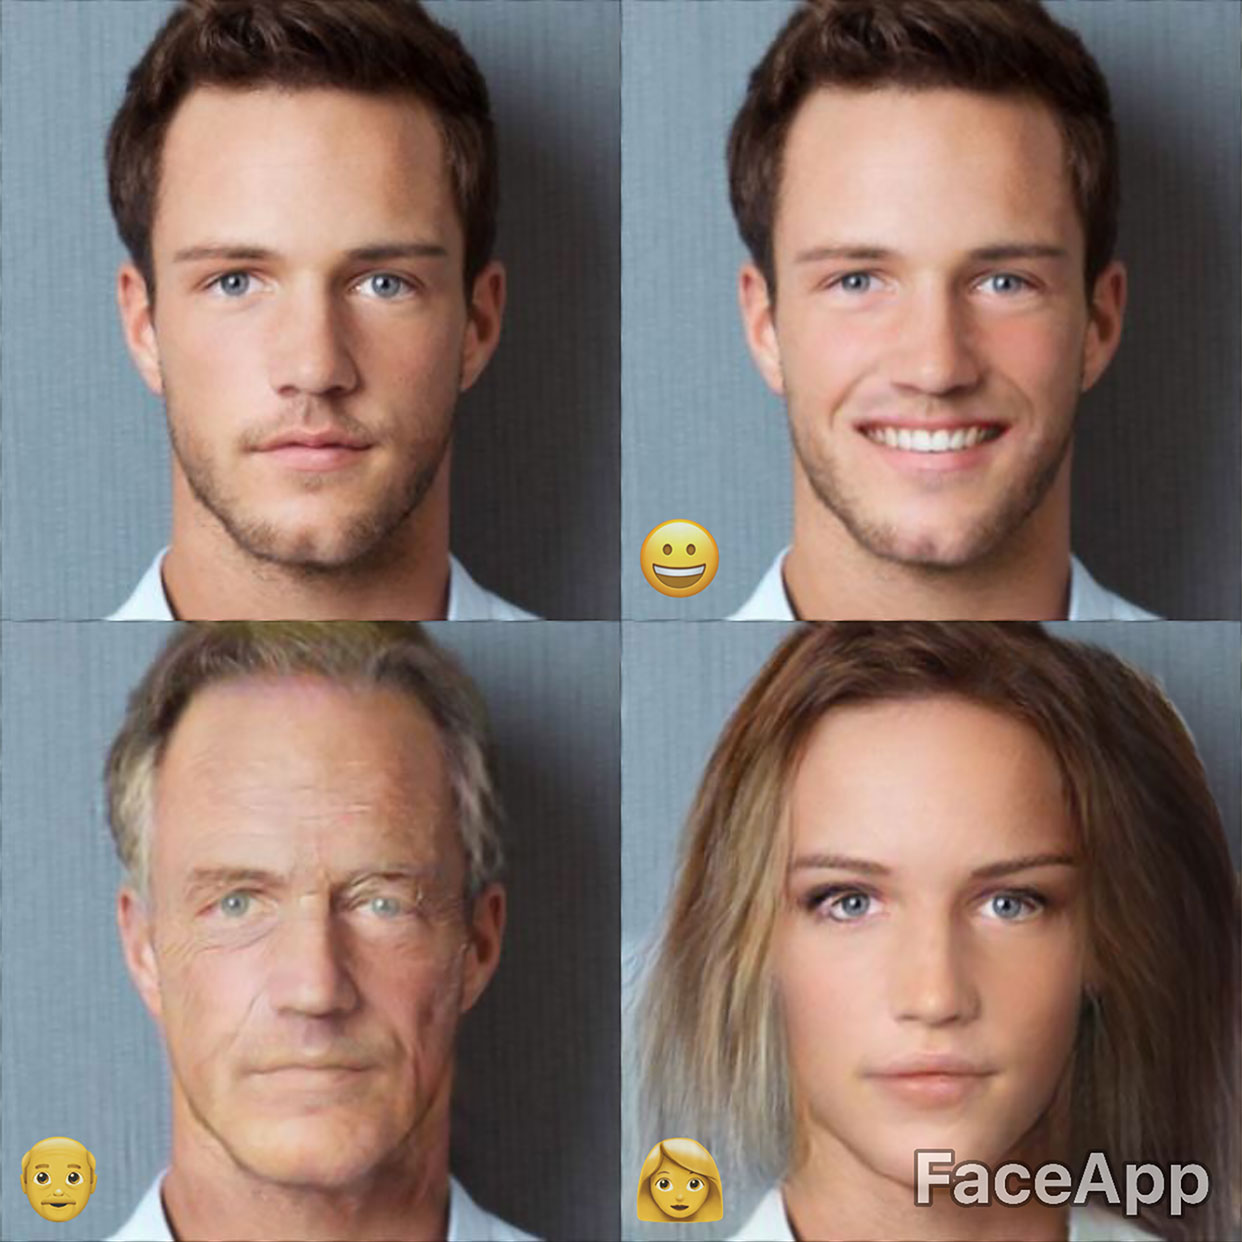 Faceapp – a glimpse of the future for trans people?